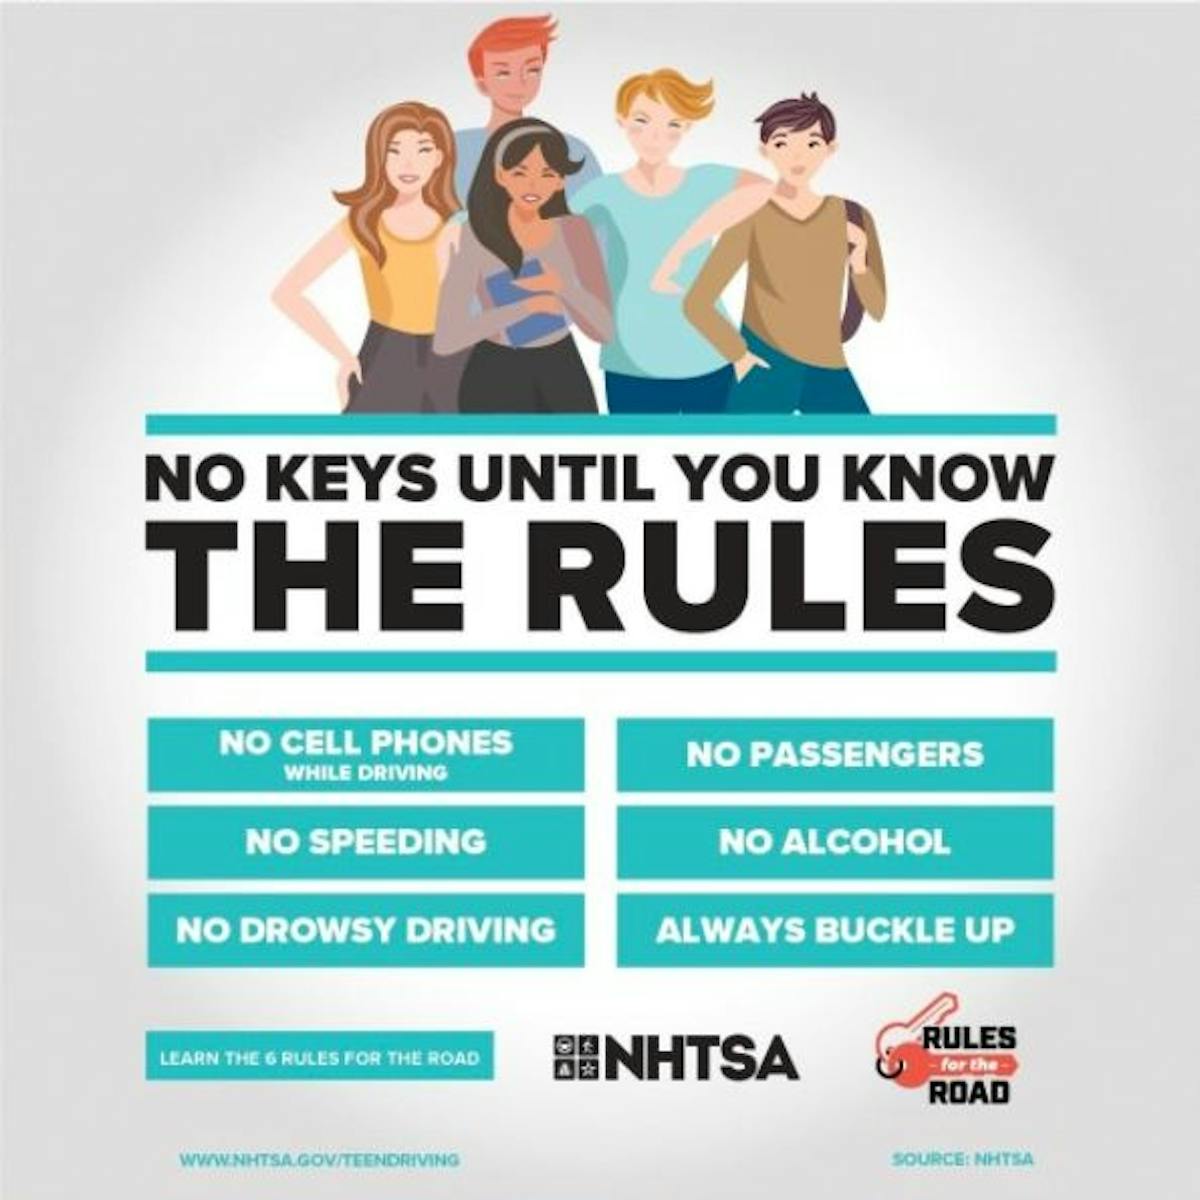 Are You Aware of These Road Rules? Keep Yourself and Others Safe by Knowing the Basics - Tips for safe driving within speed limits